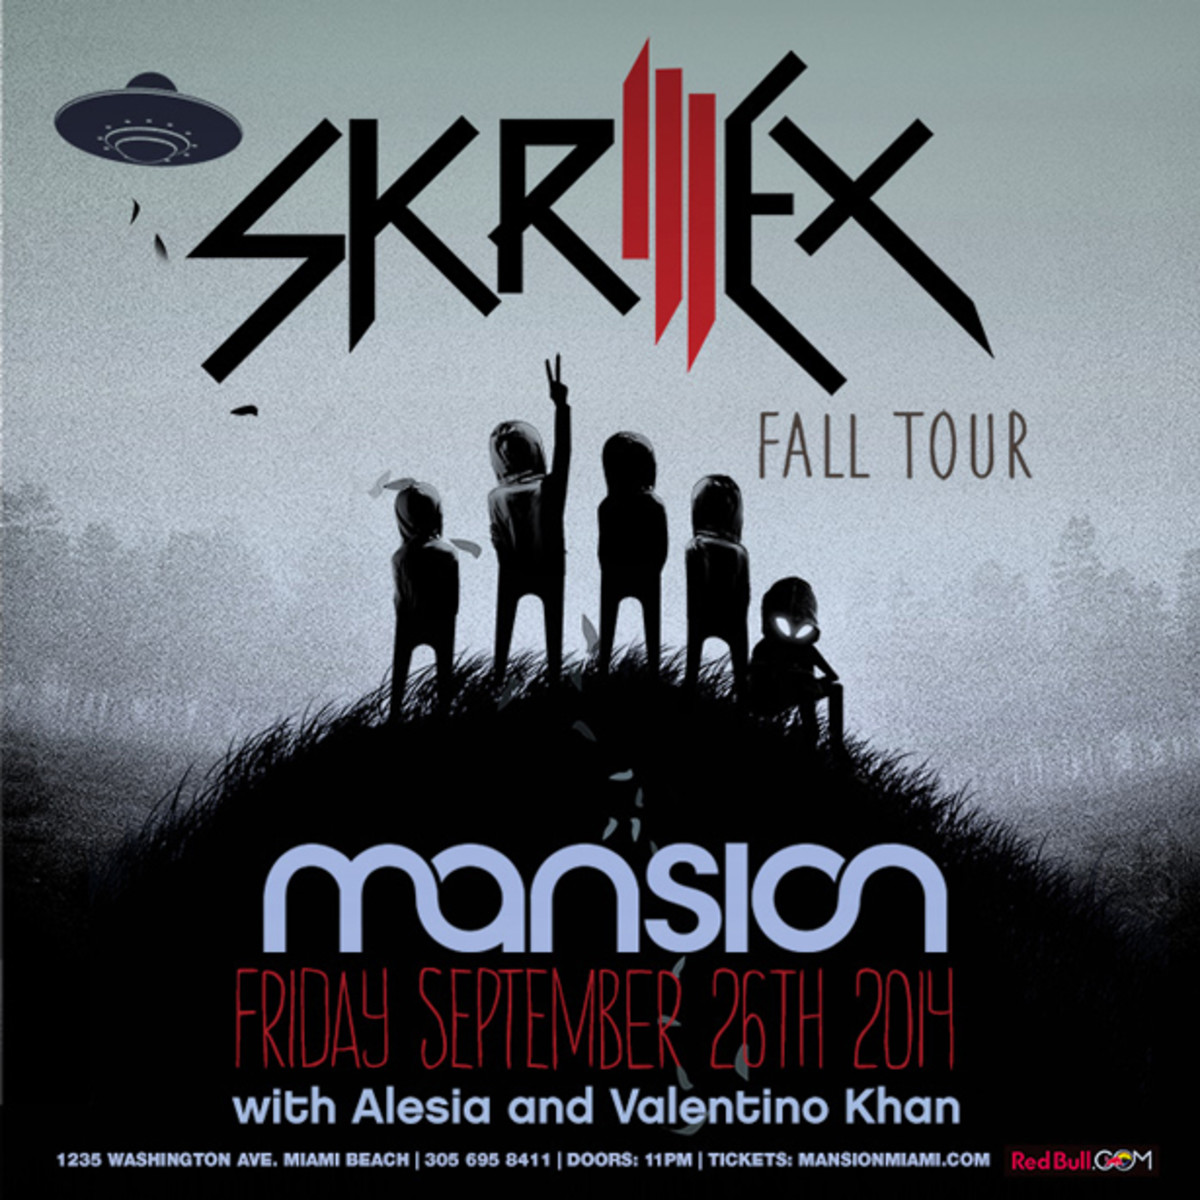 Skrillex will be kicking off Fall Tour at Mansion Nightclub in Miami Friday, September 26th!